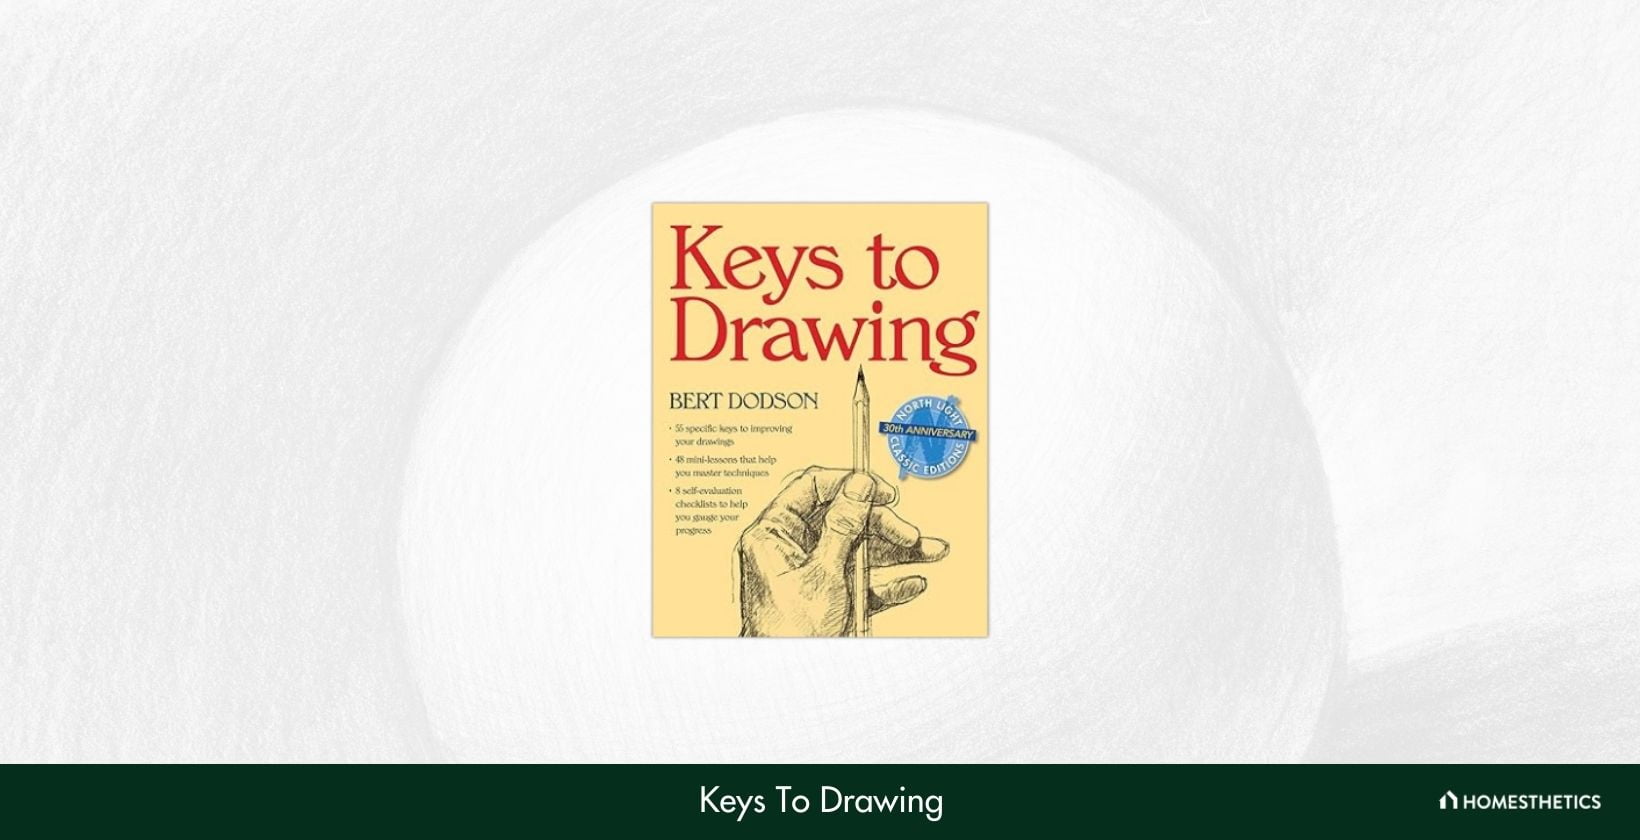 Keys To Drawing by Bert Dodson